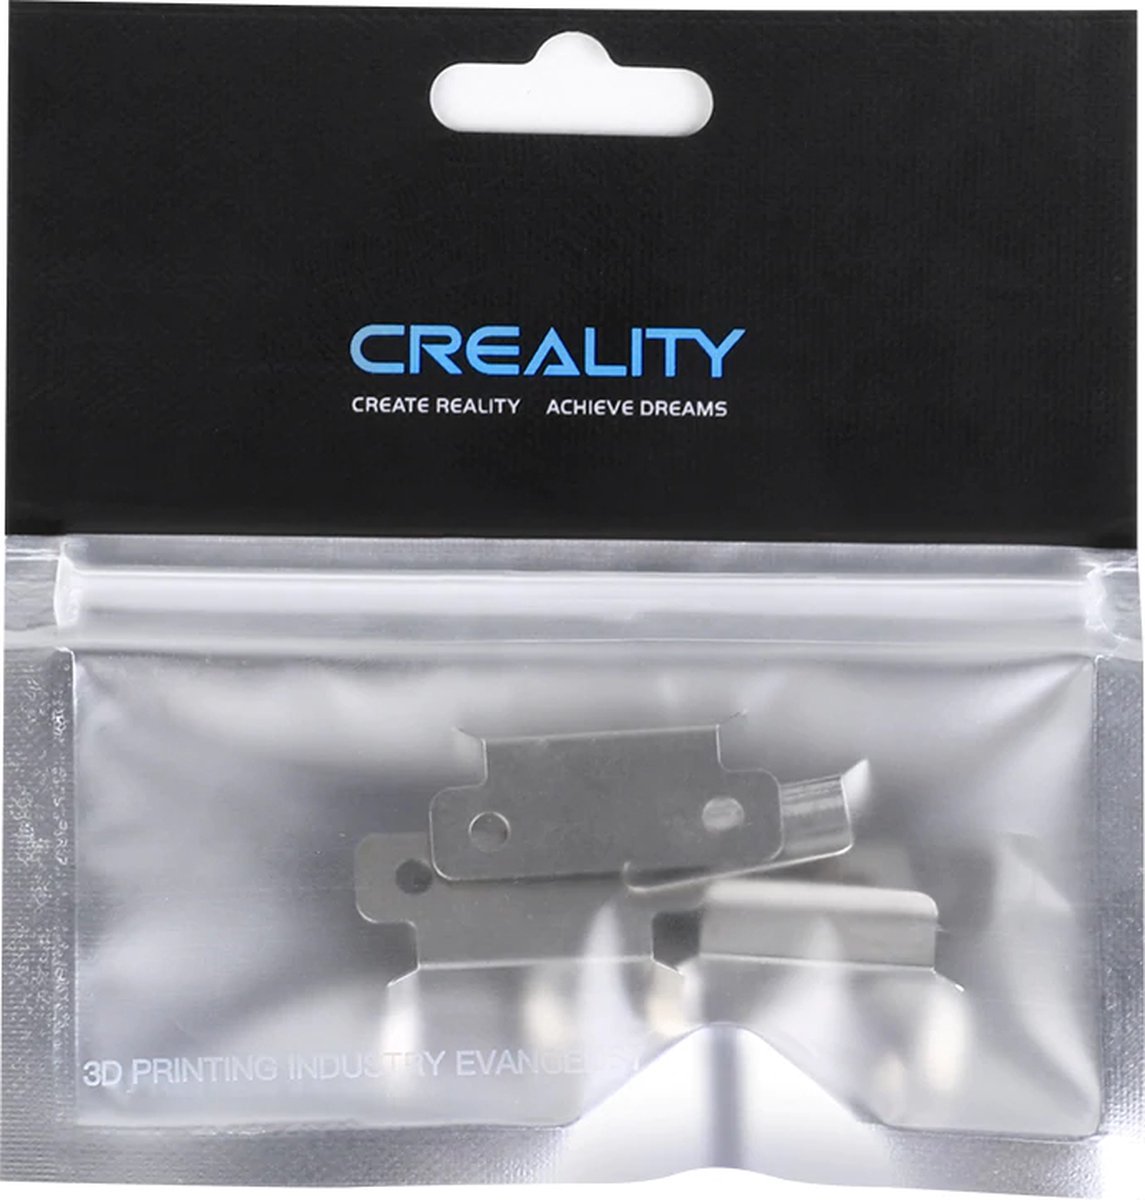 Creality - Hotbed platform clamps